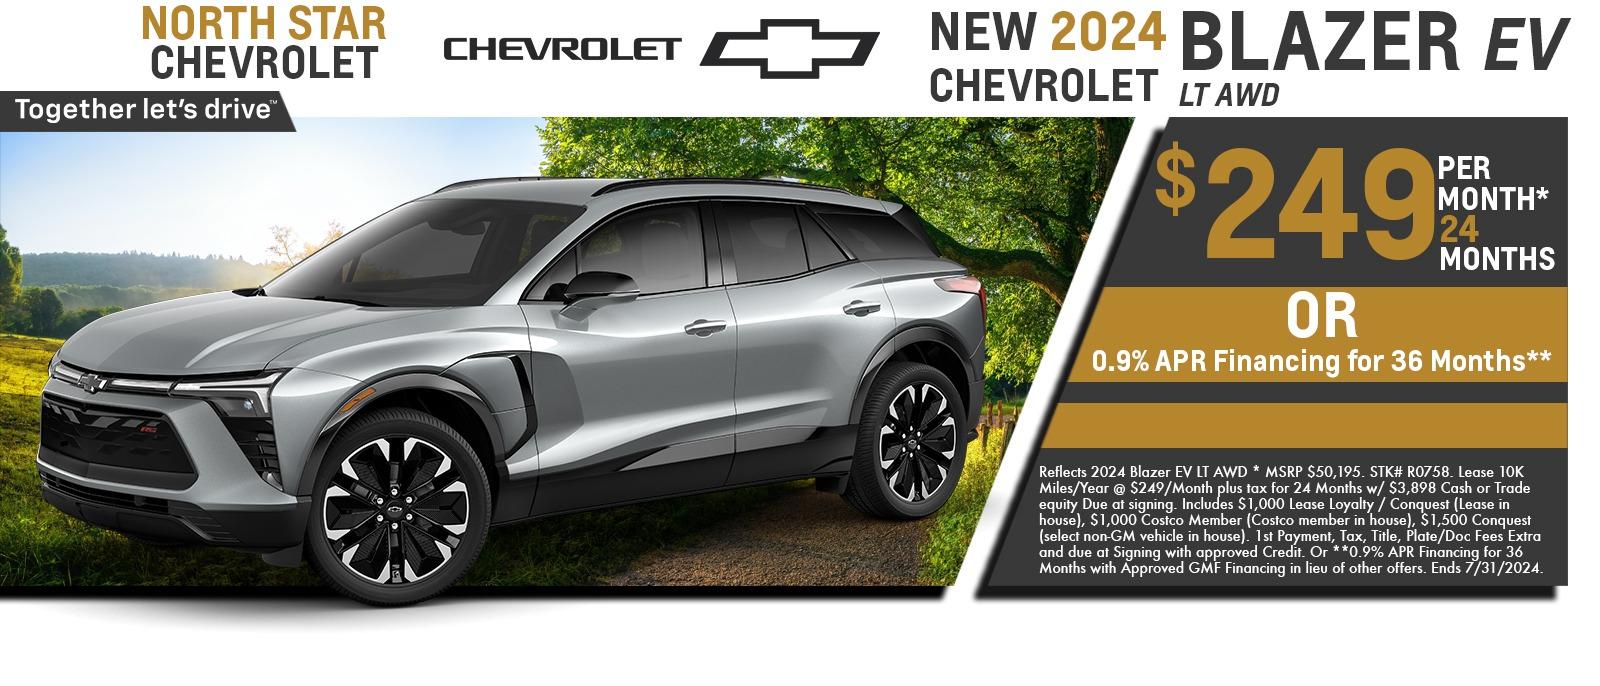 2024 Chevy Blazer EV lease for $249 Per month for 24 months